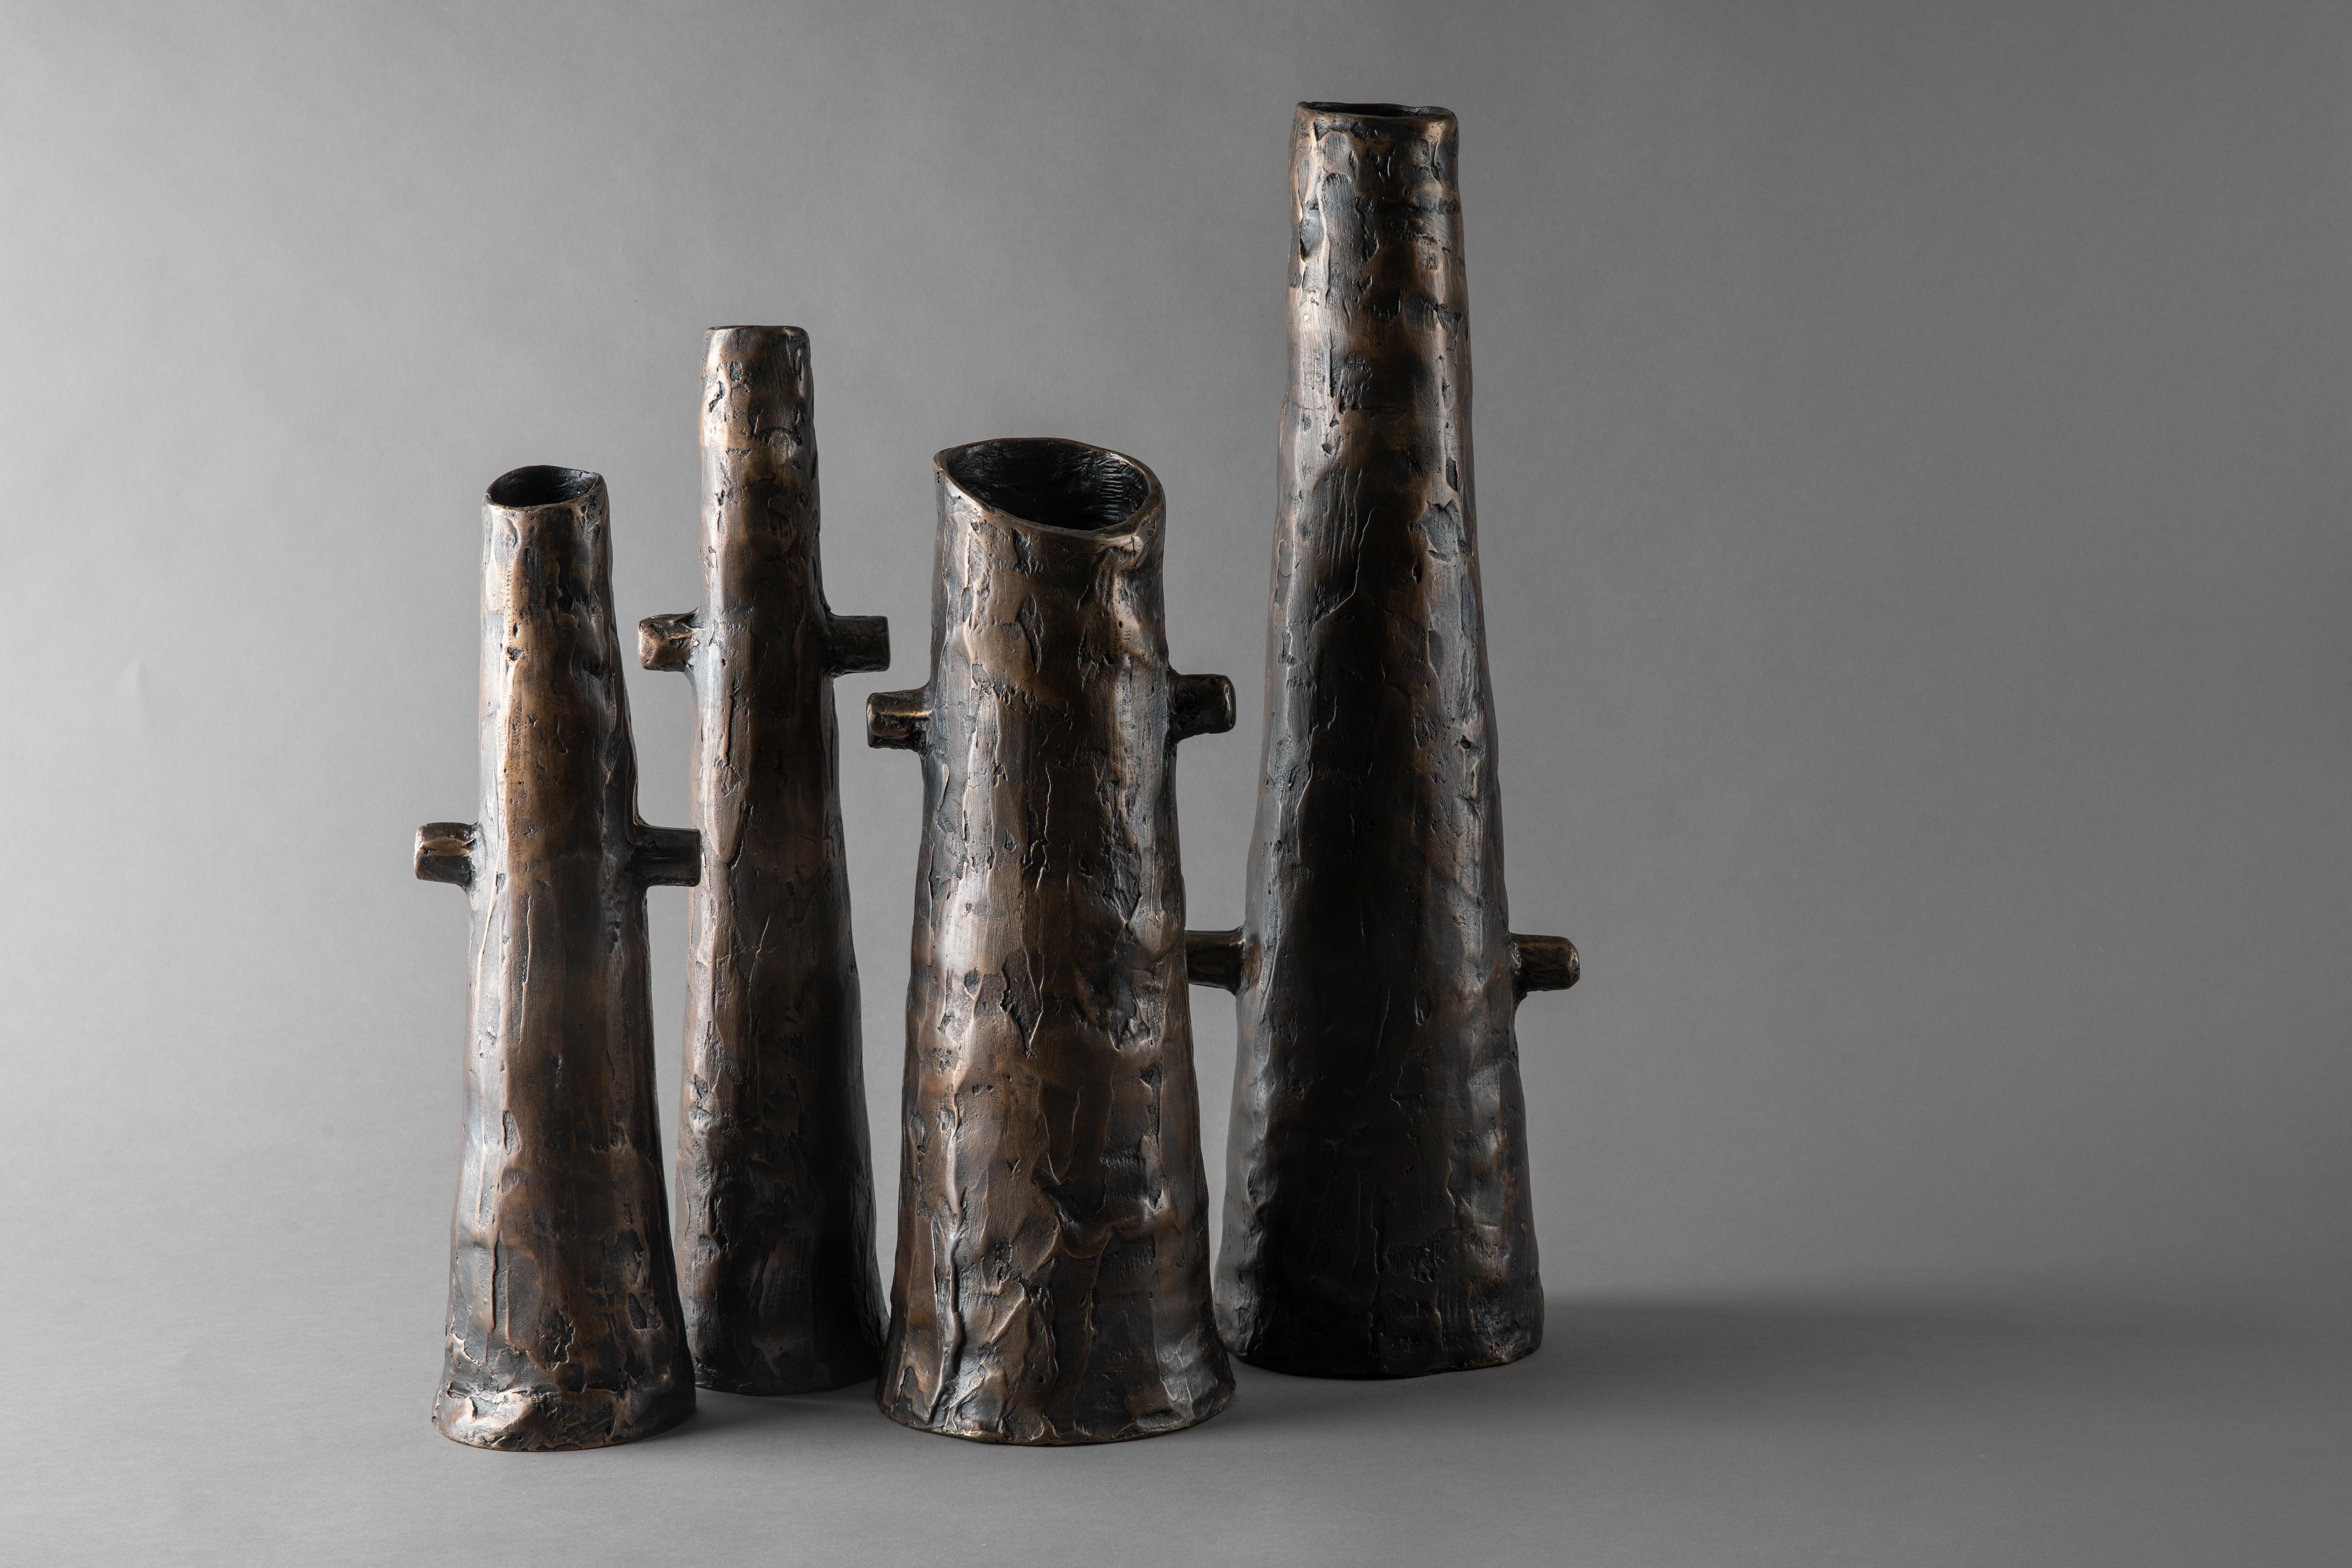 Set of 4 Figari vases by Jean Grisoni
Dimensions: H 48 x D 14, H 40 x D 9, H 36 x D 14, H 34 x D 9 cm
Materials: bronze

Patinated bronze vases.

Jean Grisoni
In recent years, art furniture has become Jean Grisoni’s territory of expression.
Bronze